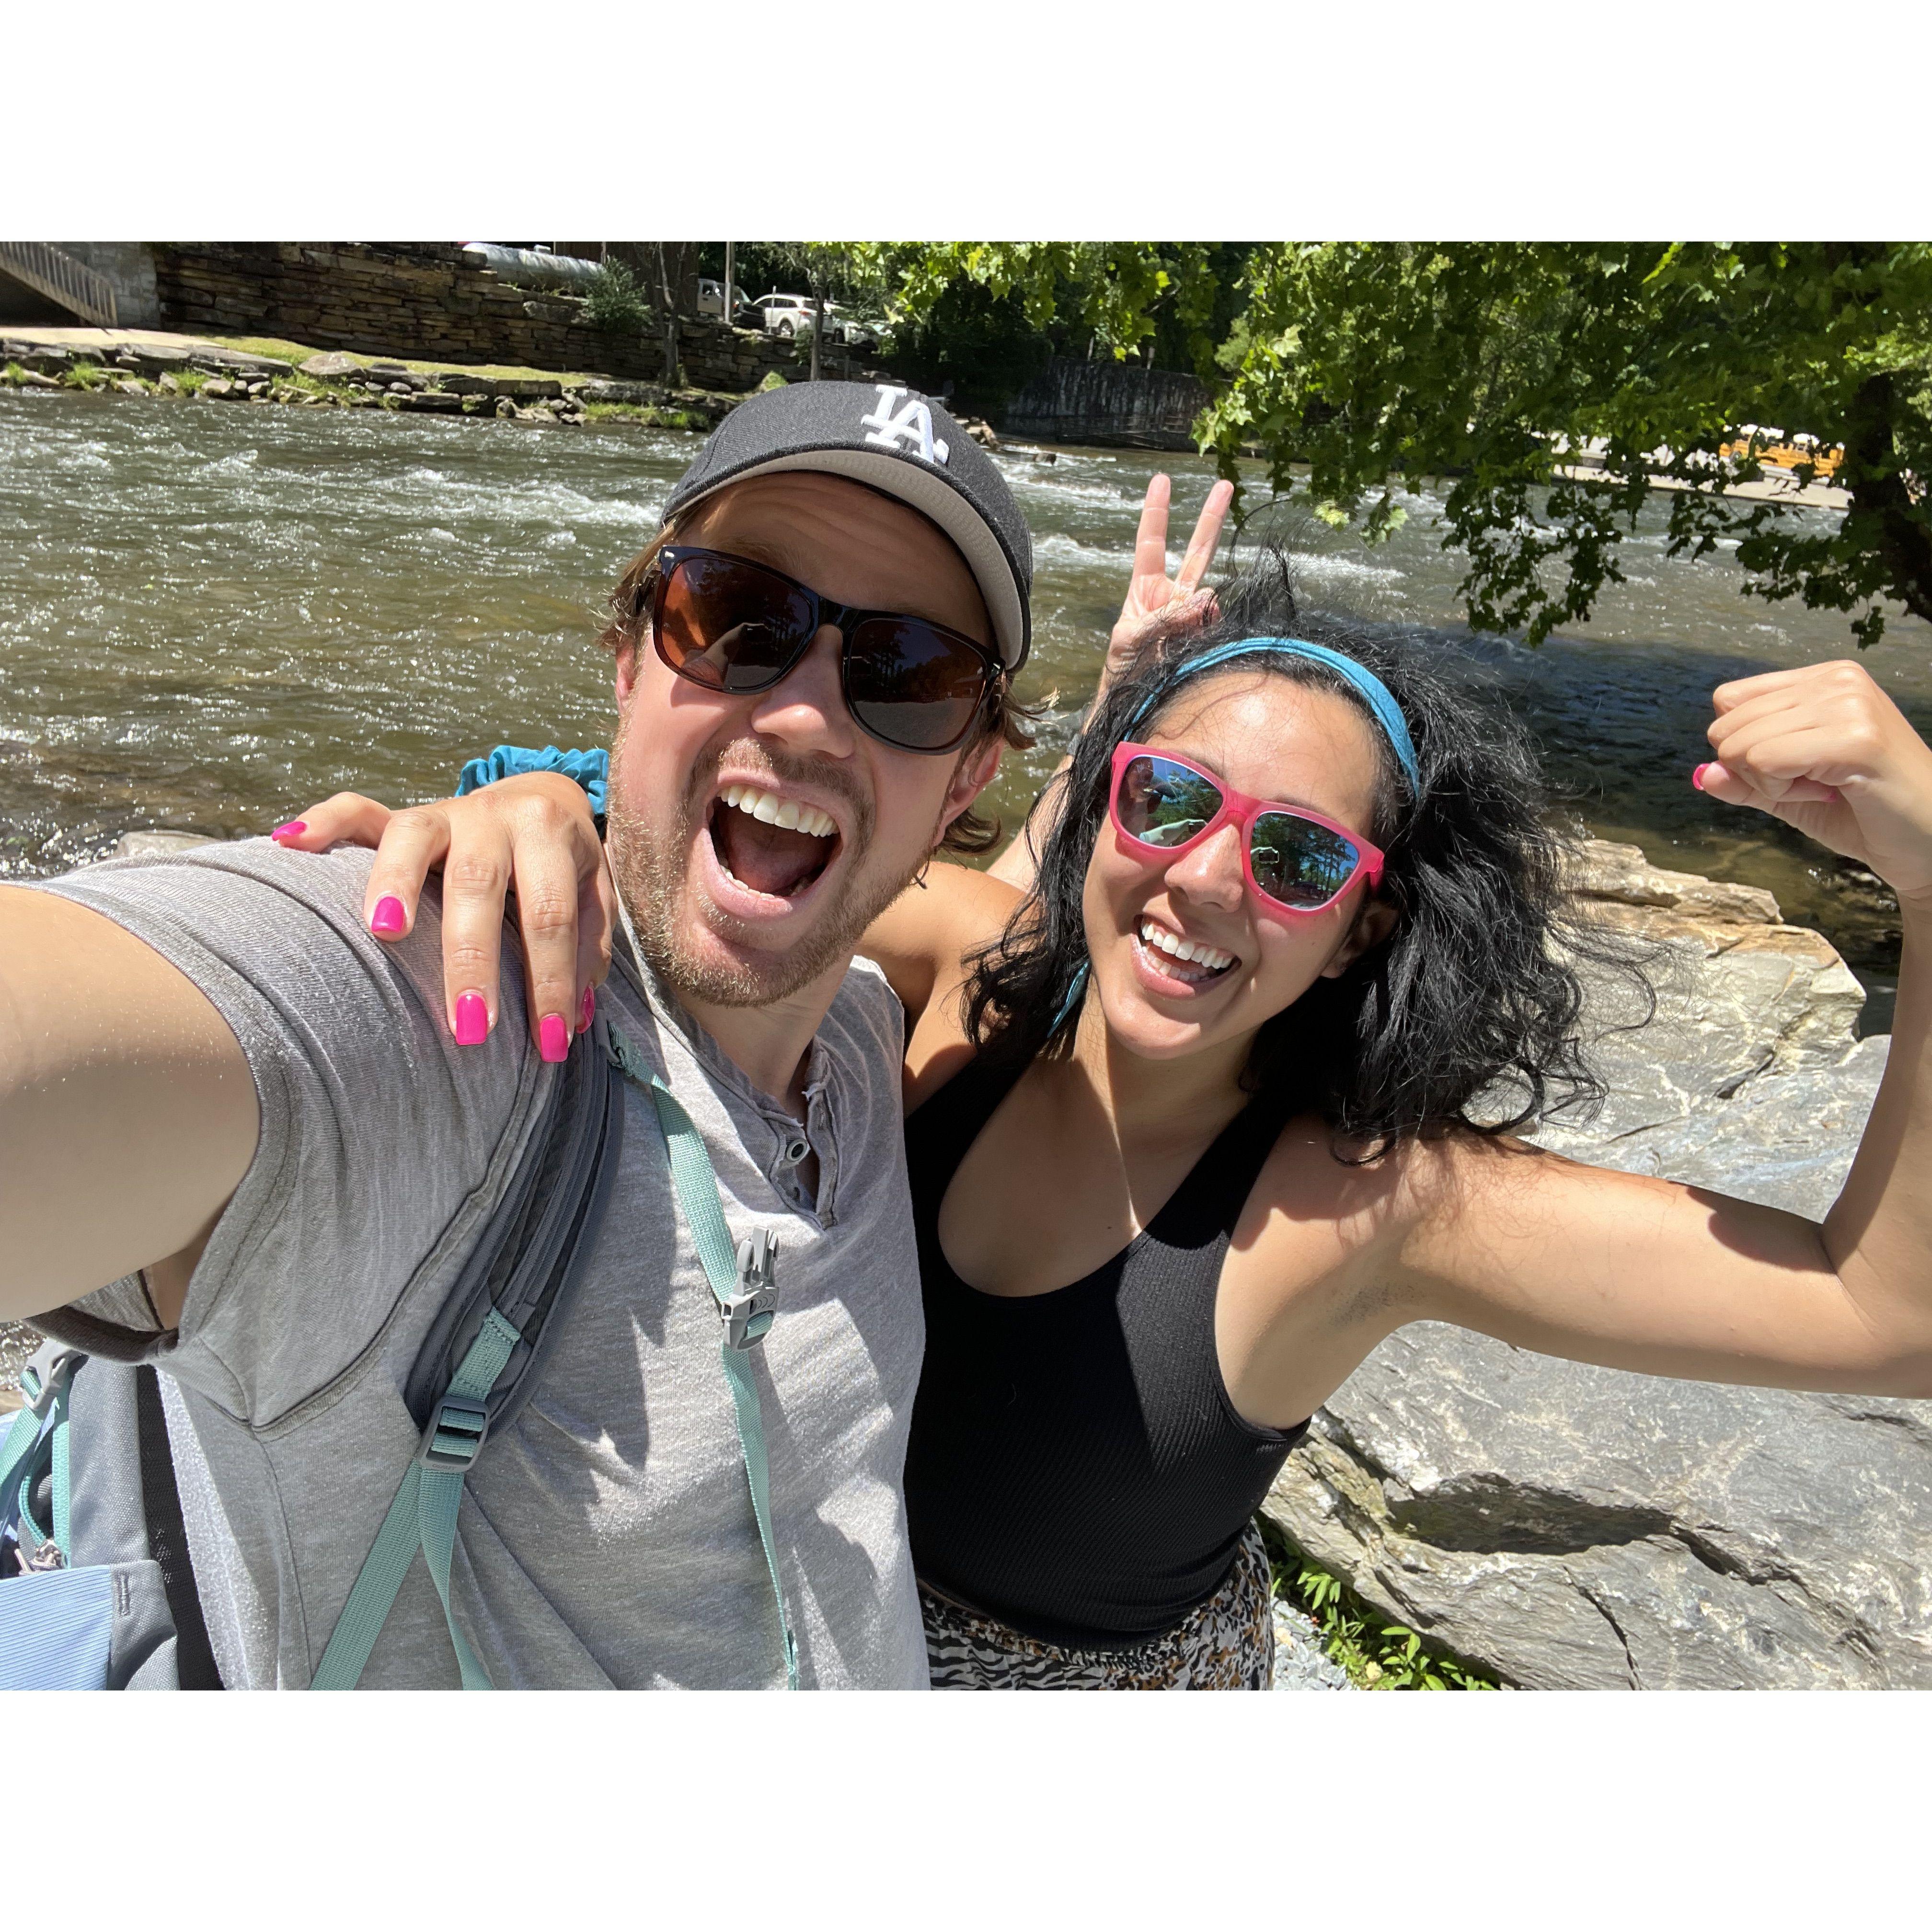 Chrisy's first time white water rafting! Zach always manages to get her out of her comfort zone... North Carolina. June 2022.